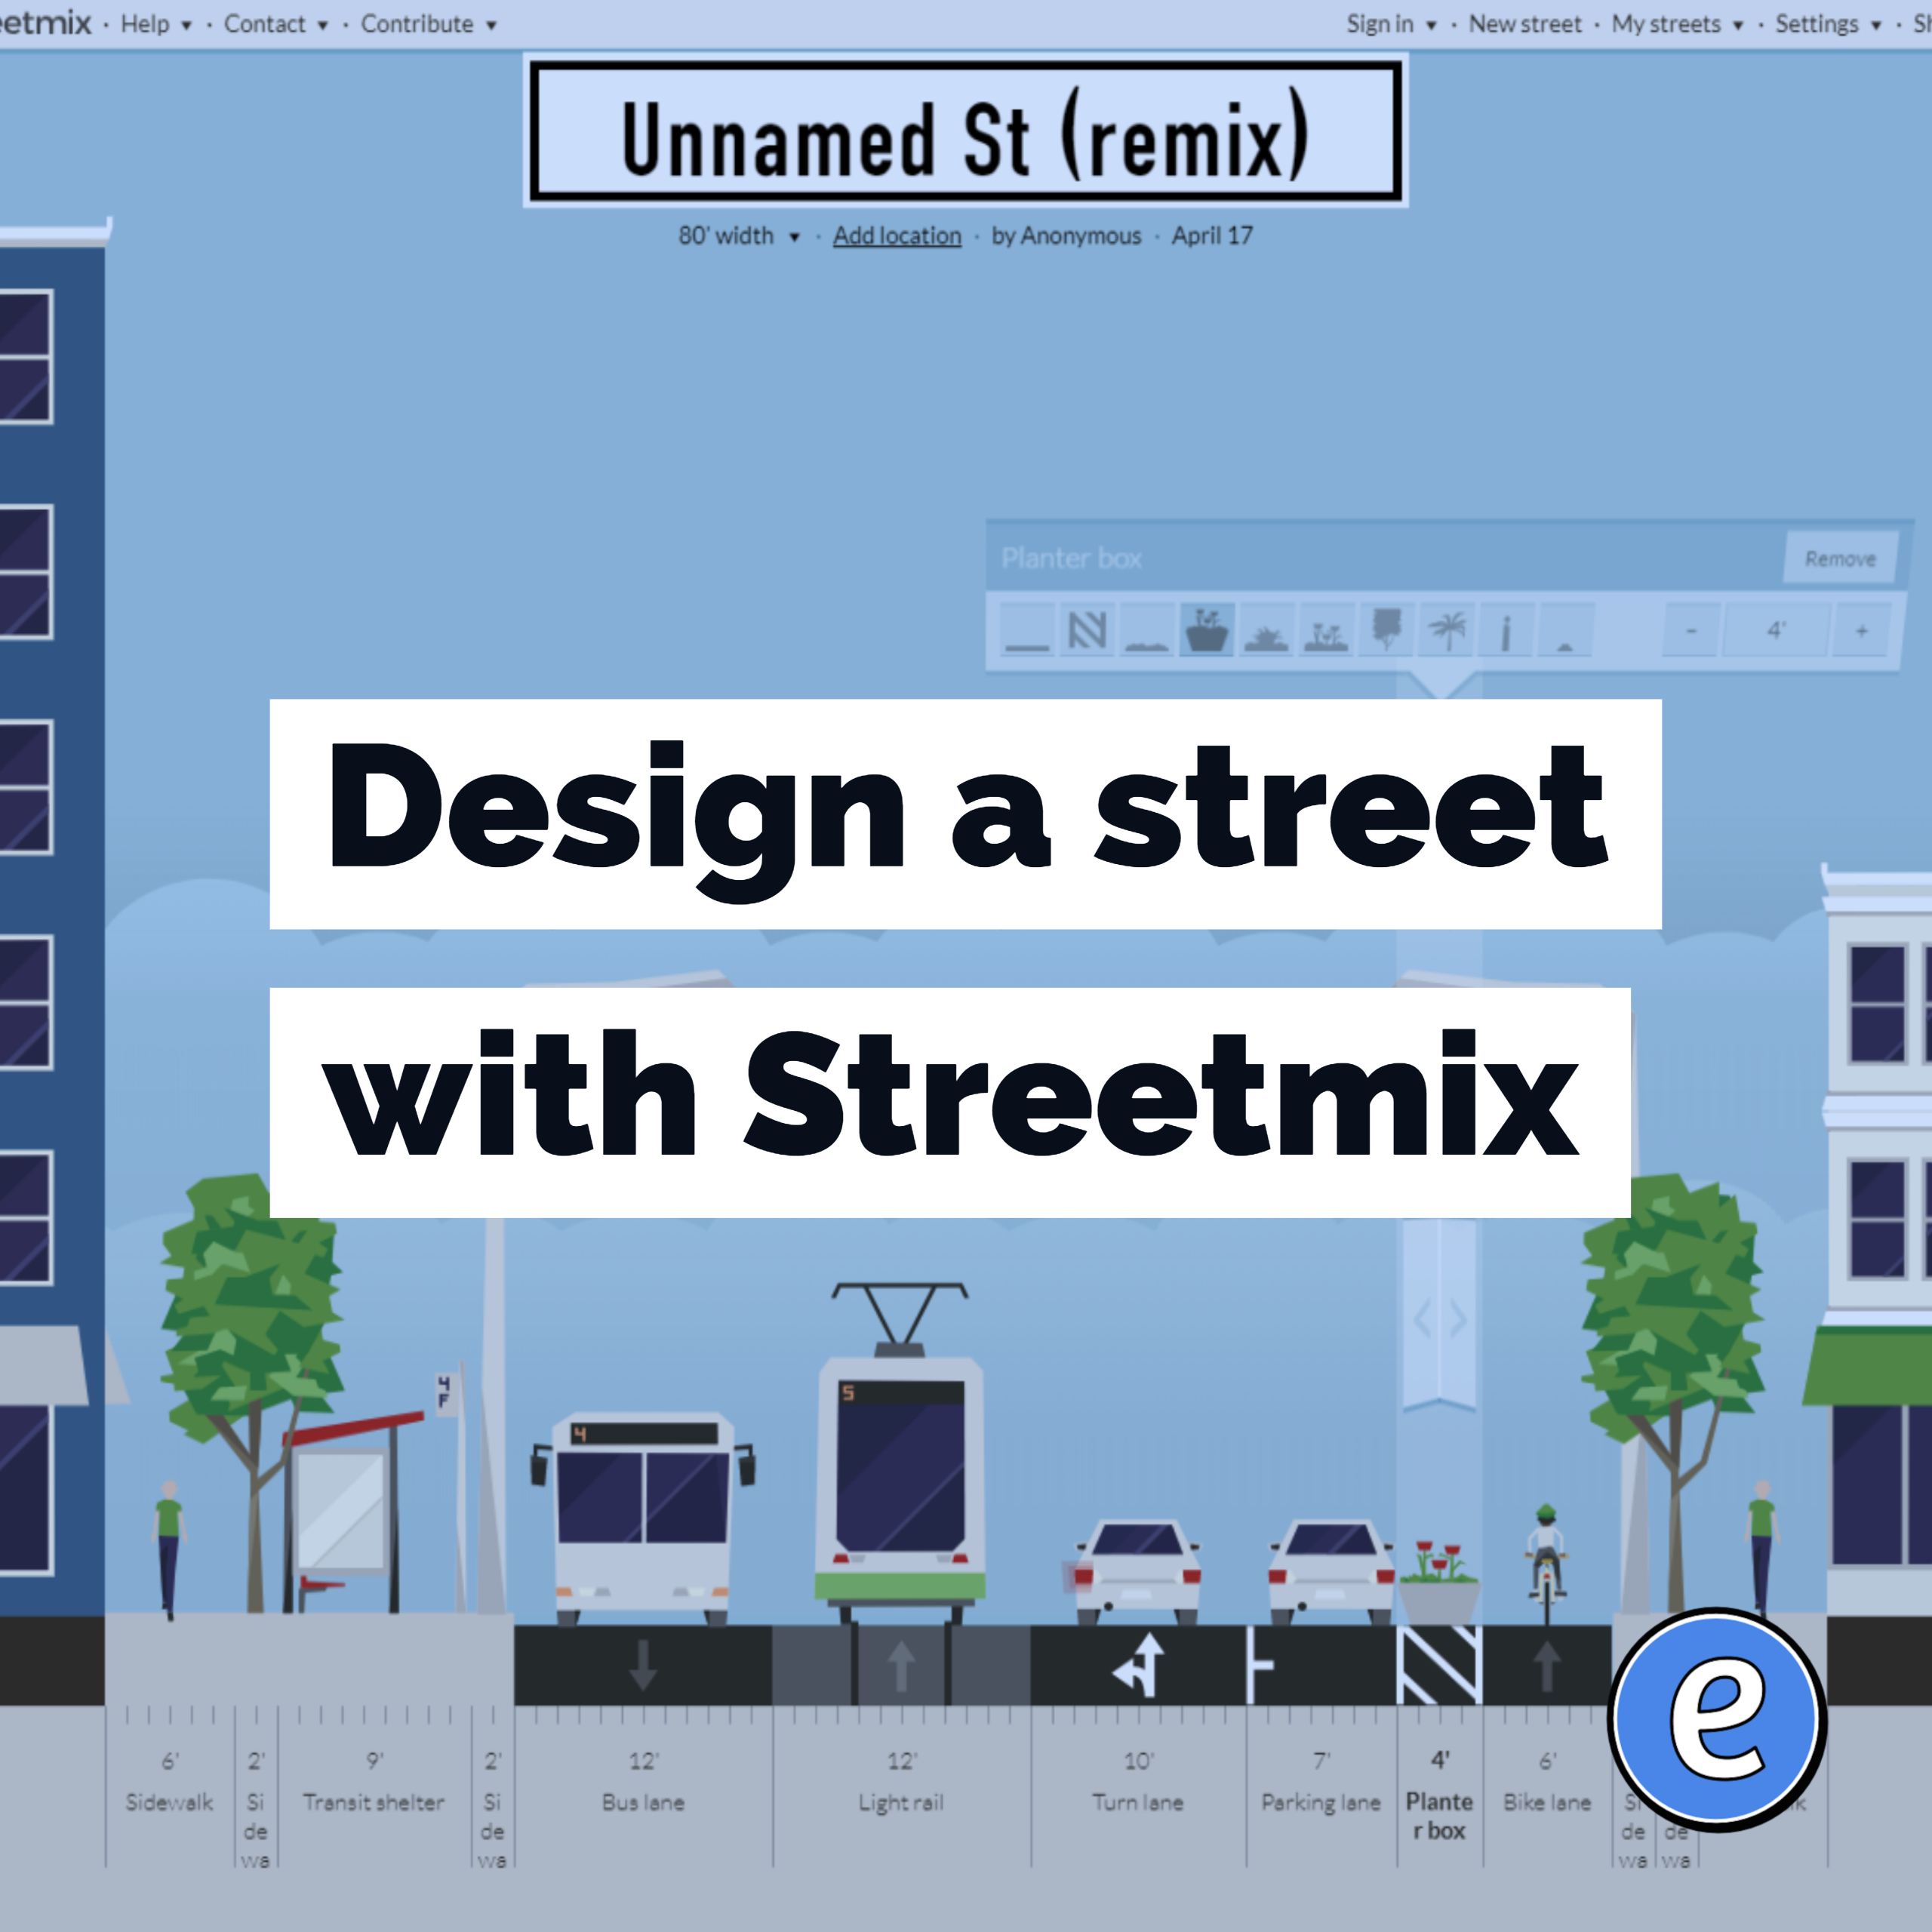 Design a street with Streetmix